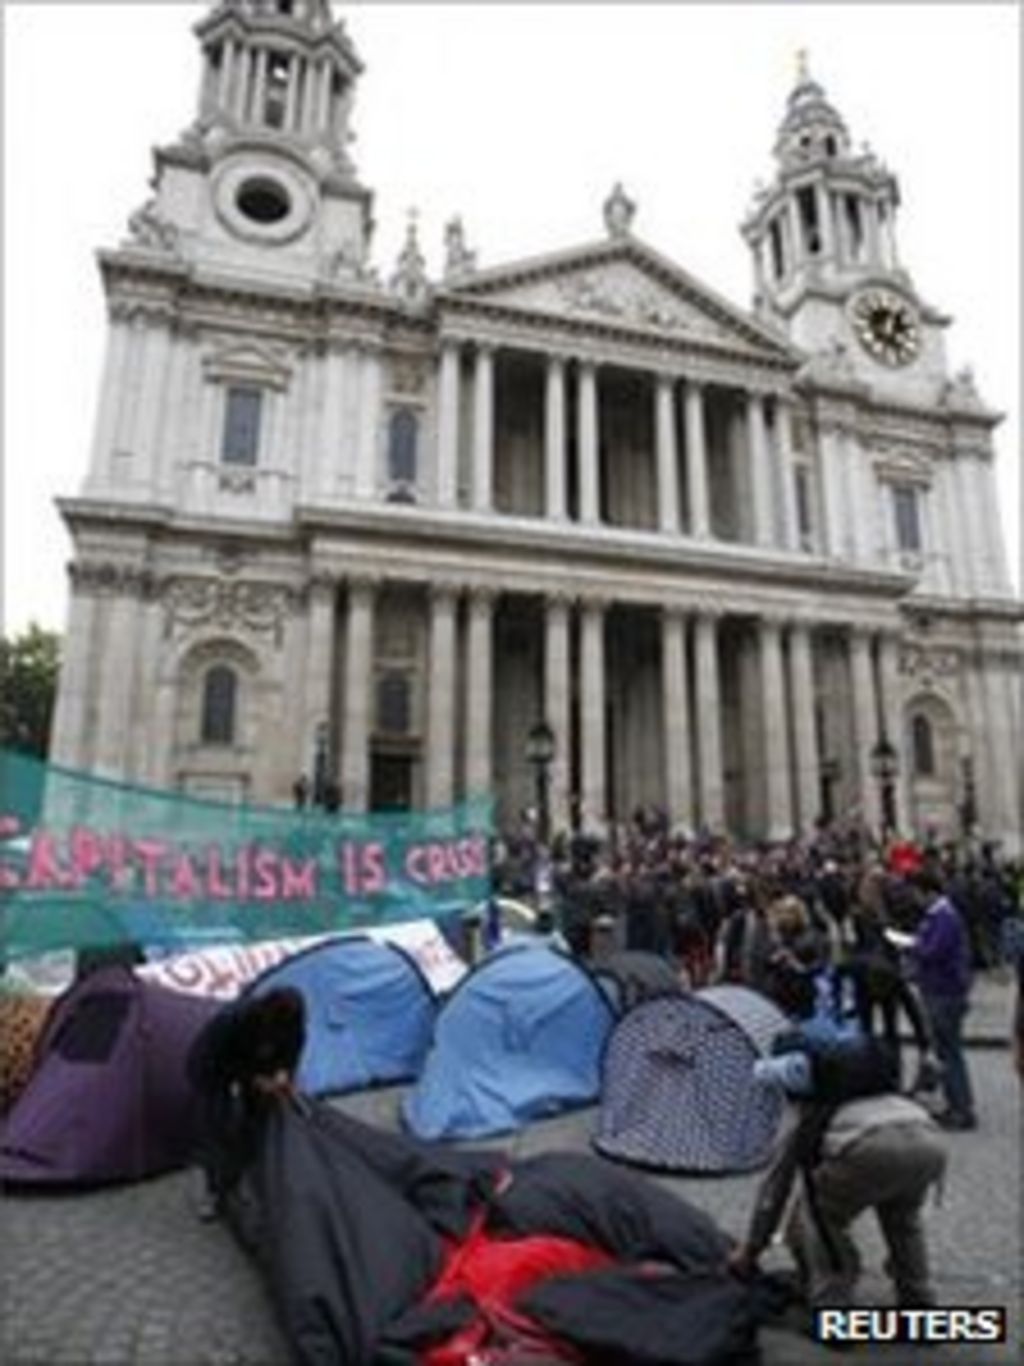 St Paul's closed by Occupy demo